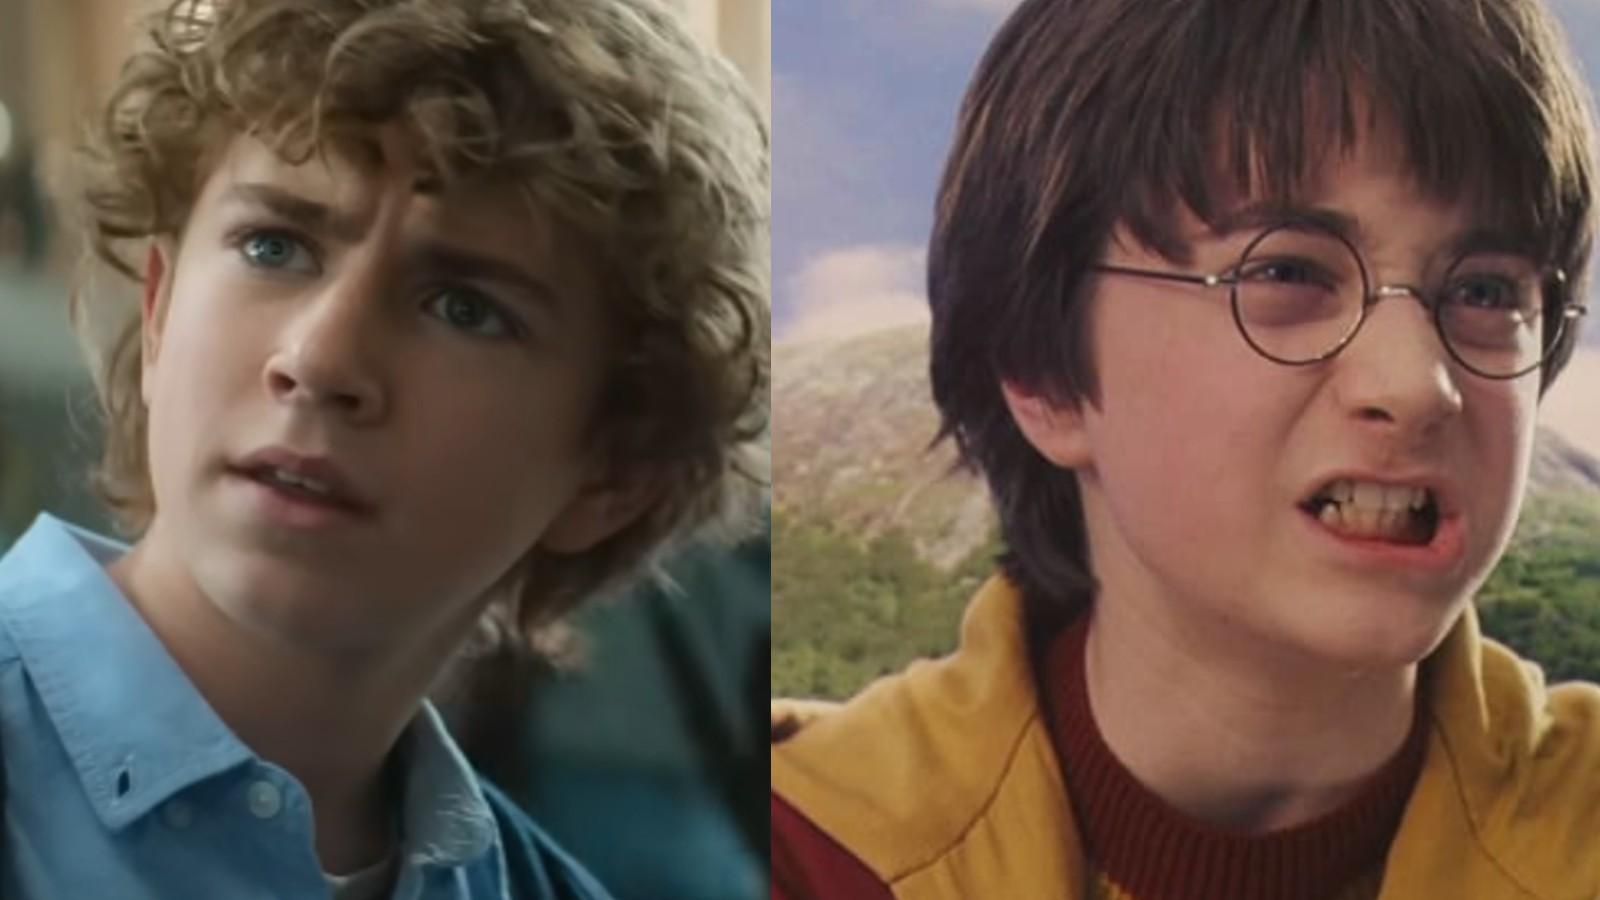 Walker Scobell as Percy Jackson and Daniel Radcliffe as Harry Potter